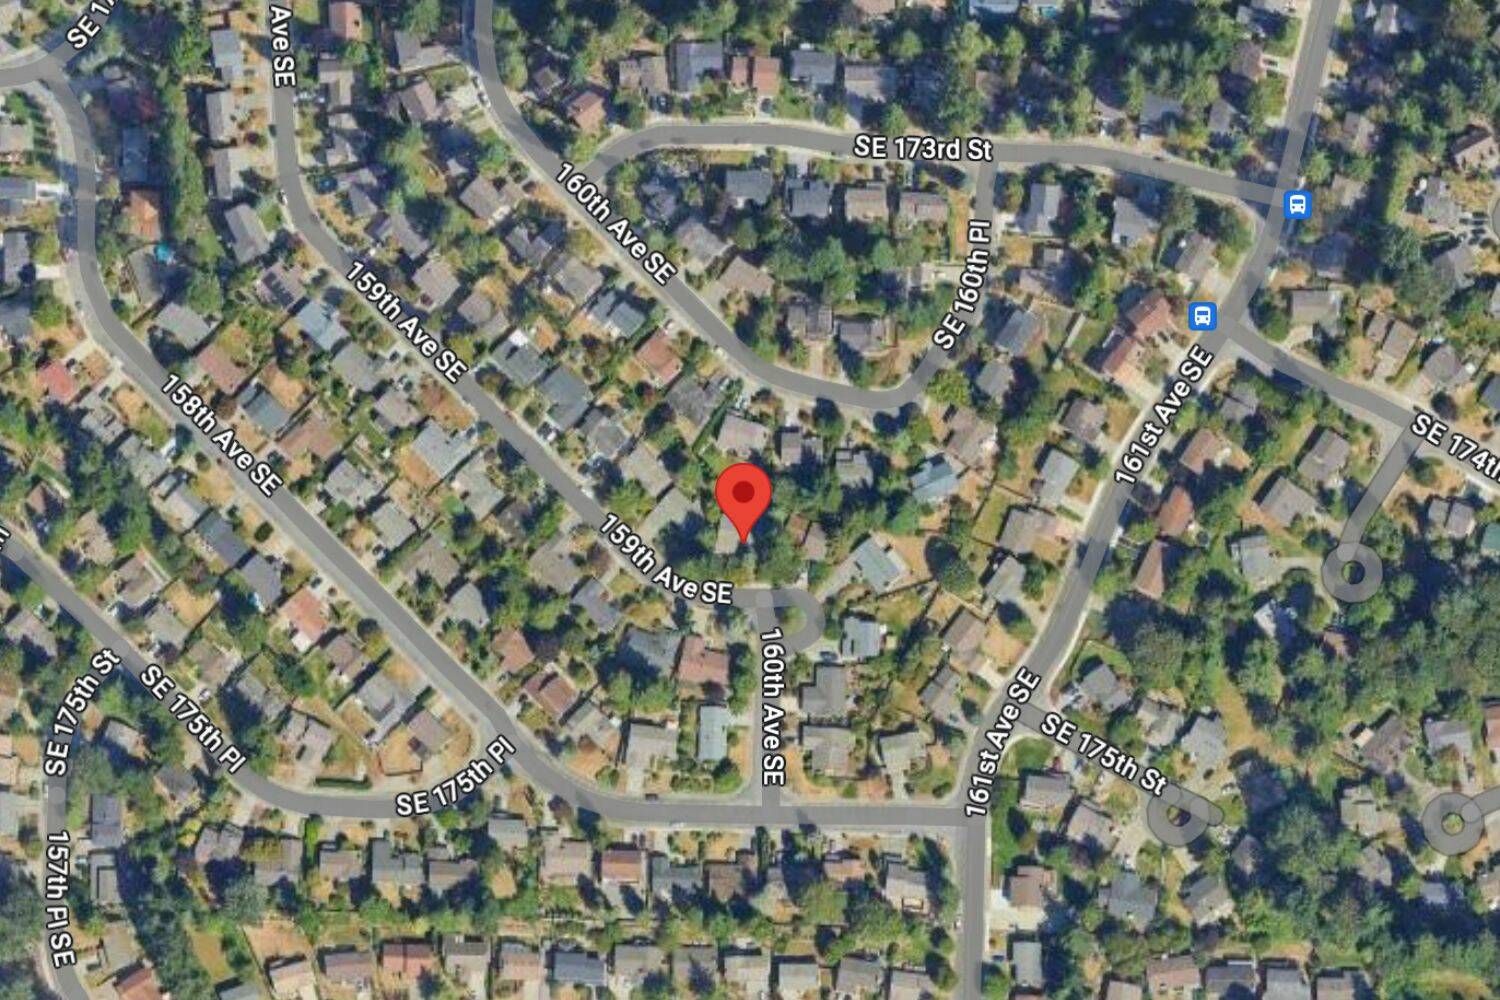 The Property involved in settlement with City of Renton at 15908 SE 175th St, Renton, WA 98058 (Screenshot from Google Maps)